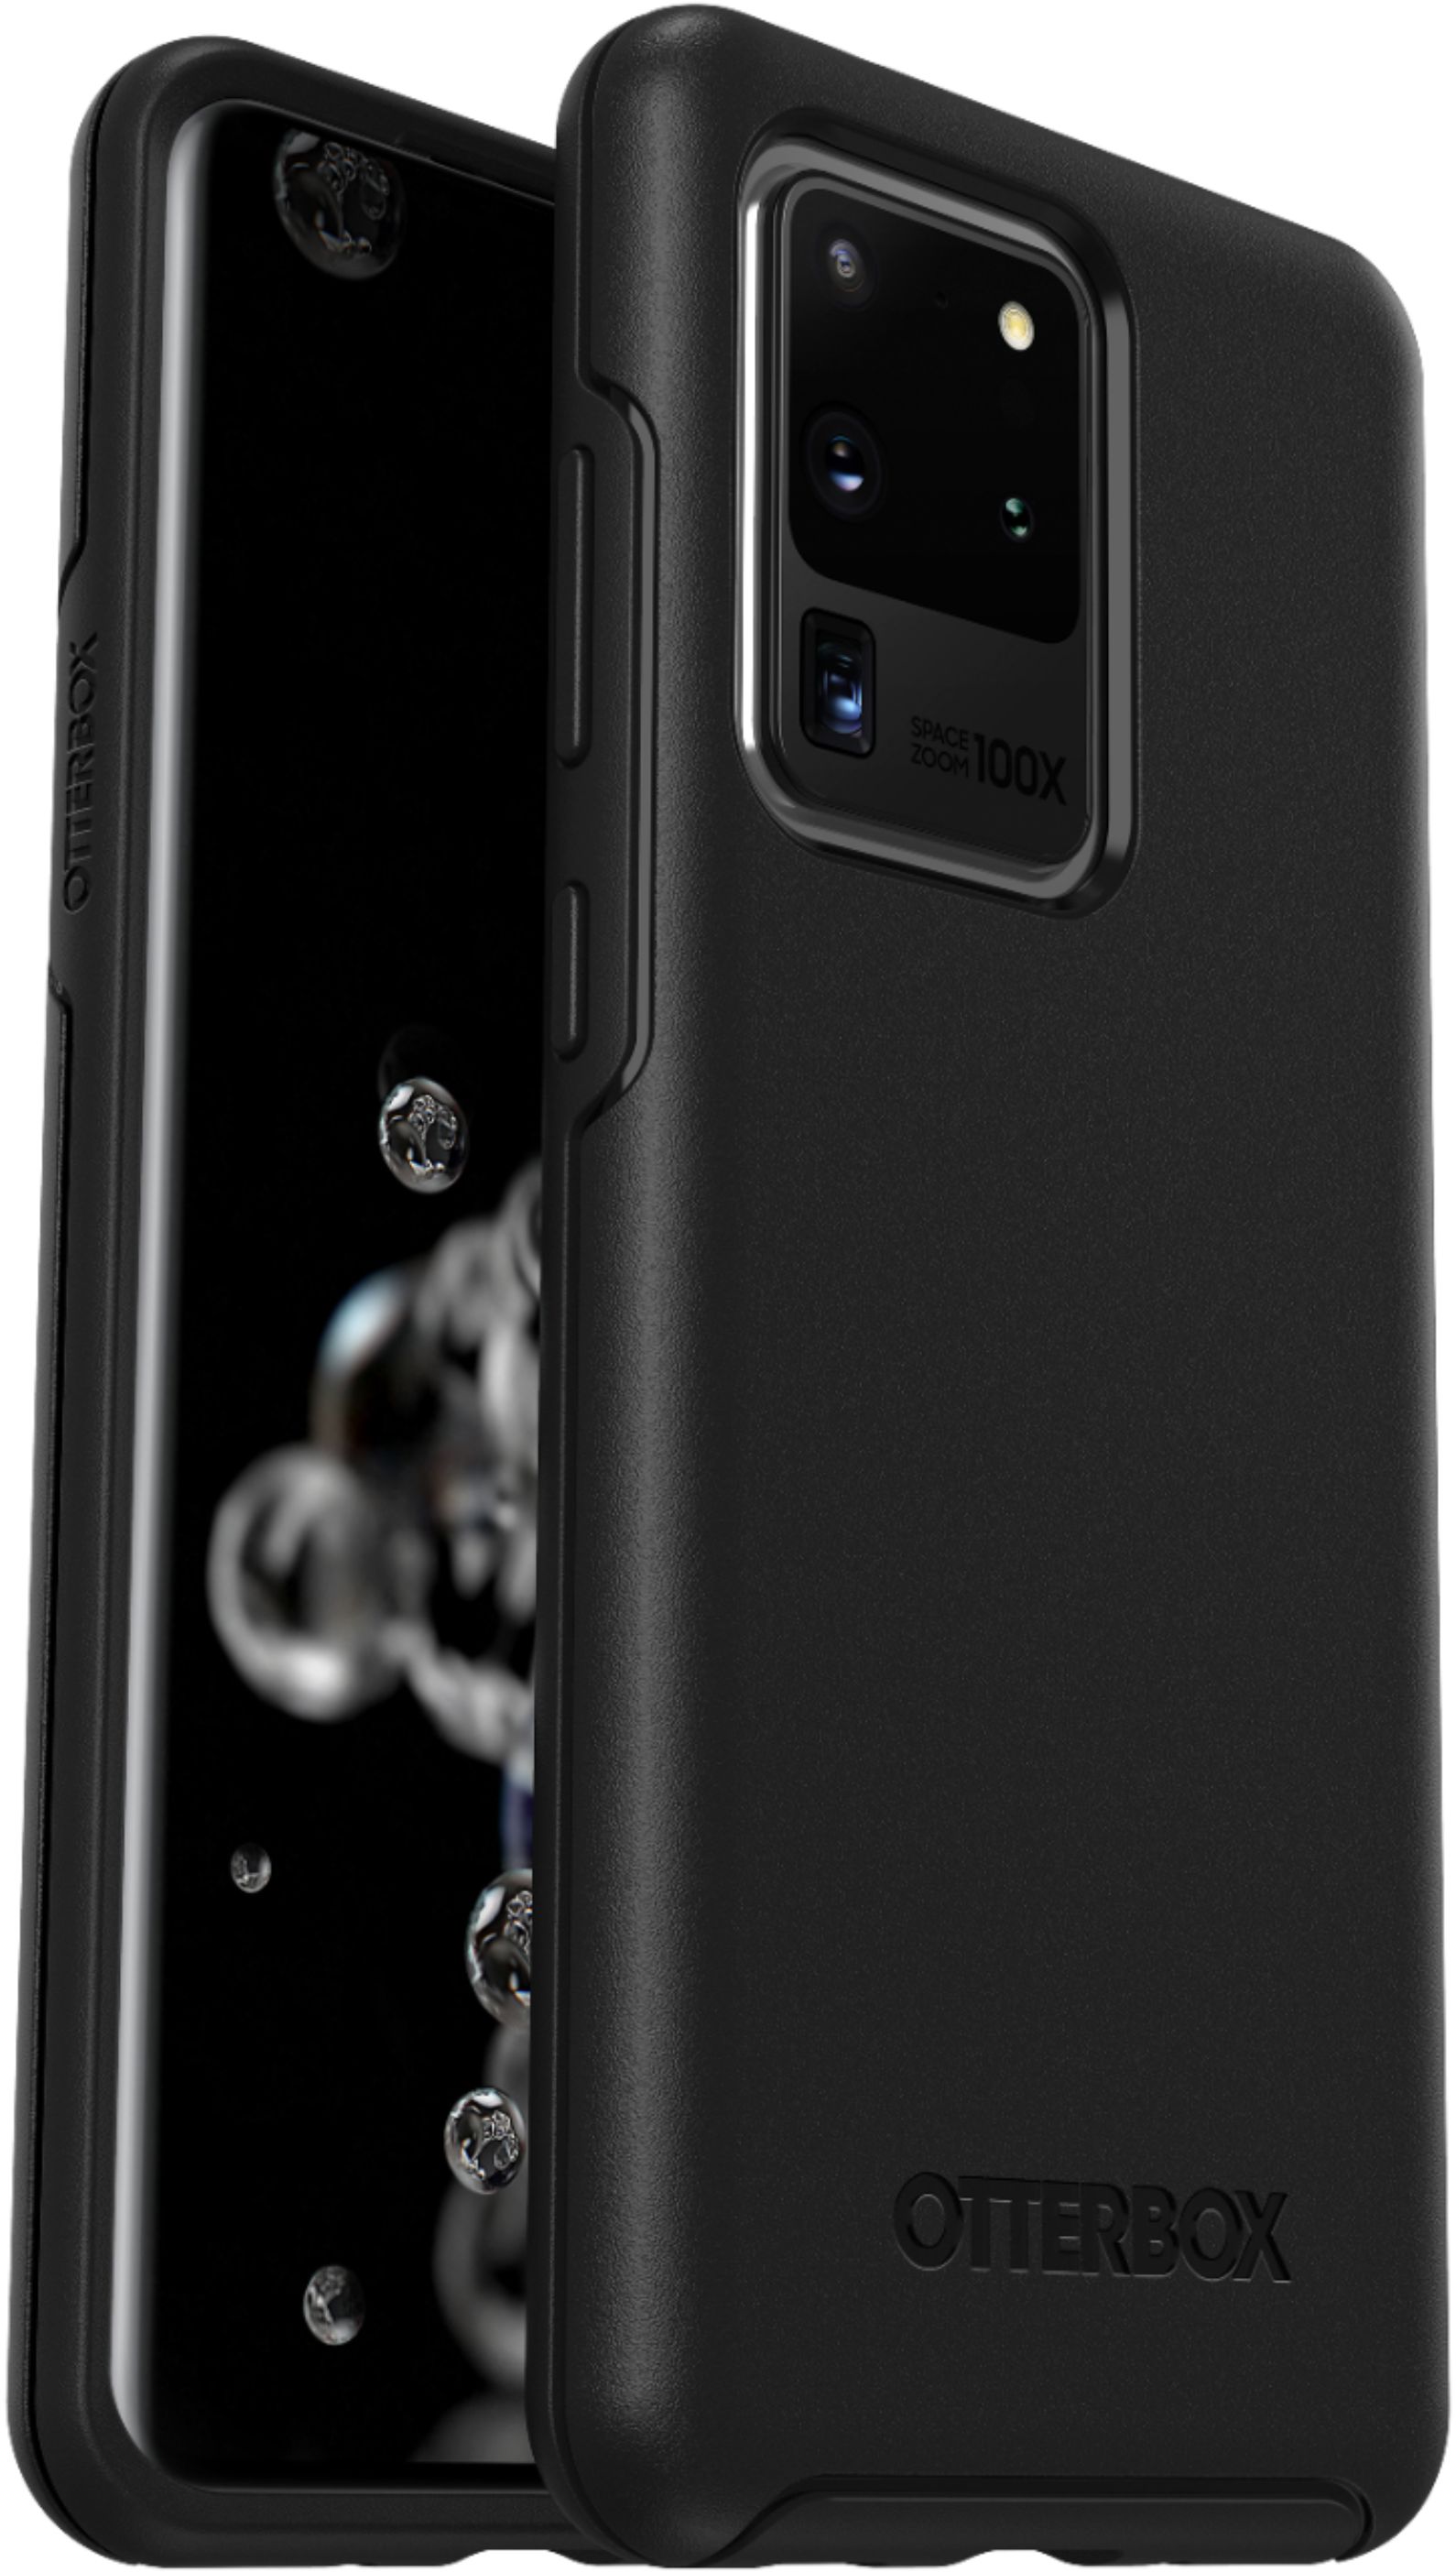 Angle View: OtterBox - Symmetry Series Case for Samsung Galaxy S20 Ultra 5G - Black